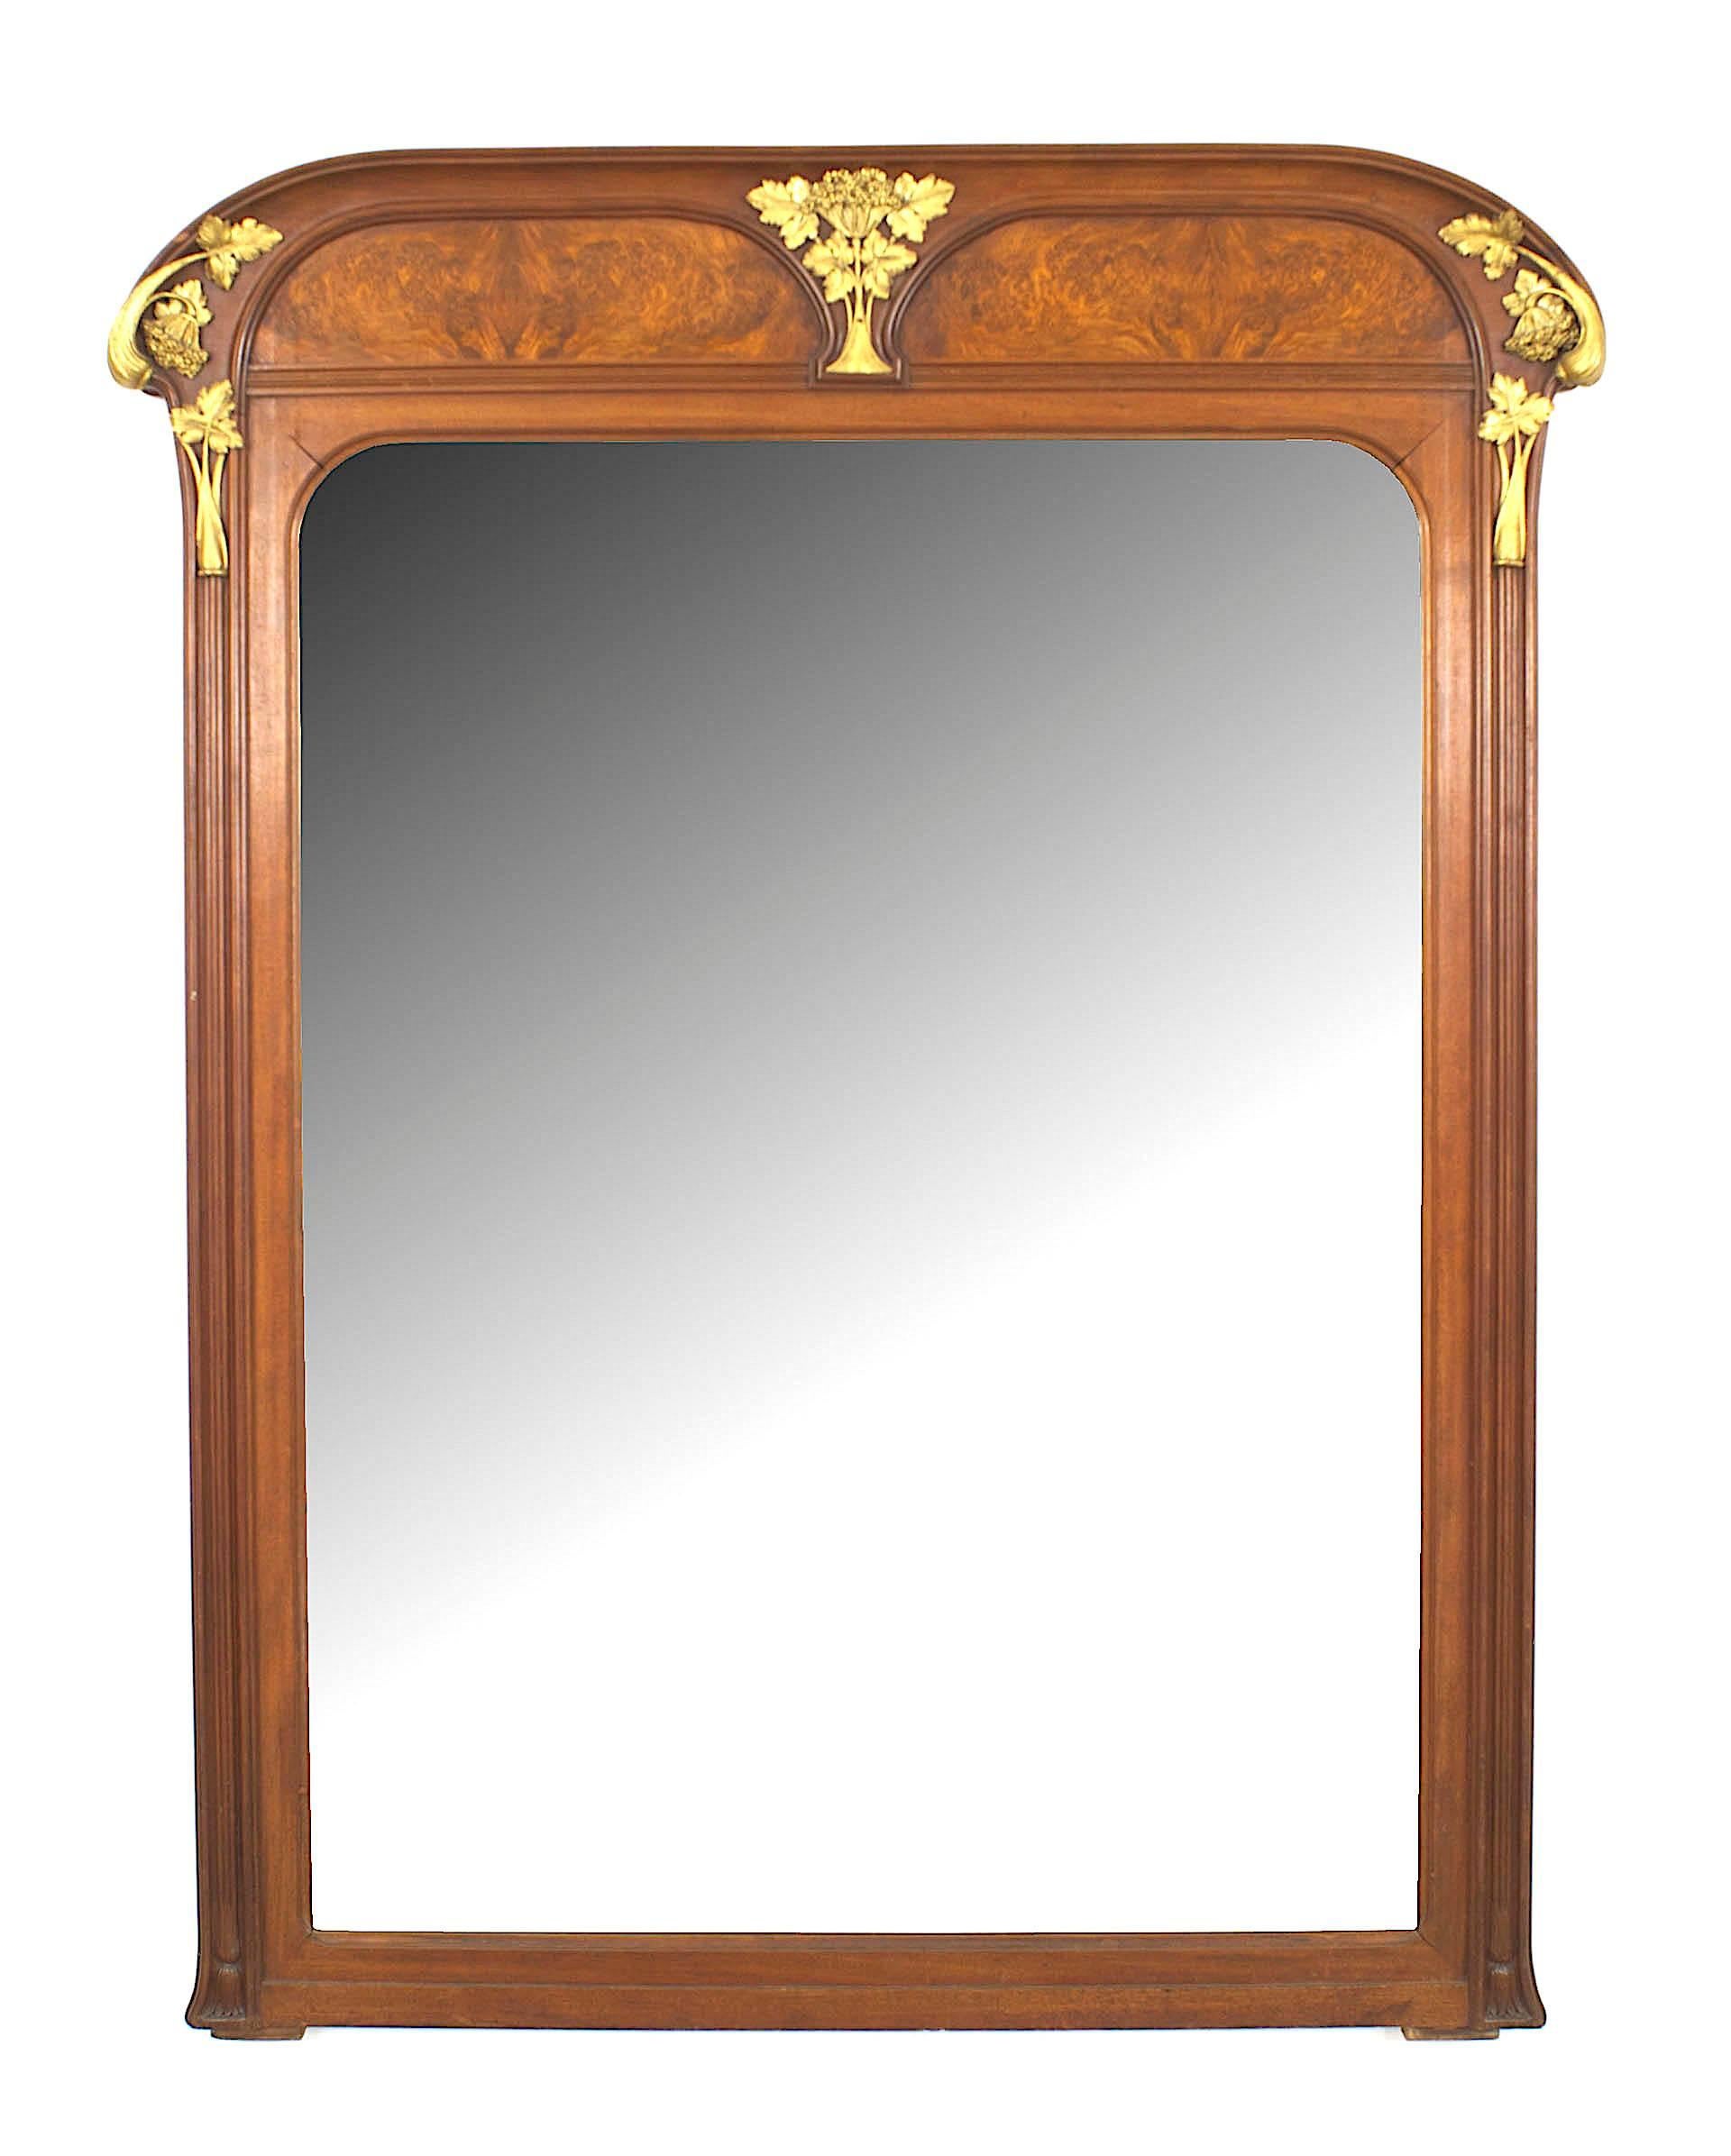 French Art Nouveau walnut wall mirror with a beveled glass, two burl walnut top panels, and floral motif gilt bronze trim. (by LOUIS MAJORELLE)
